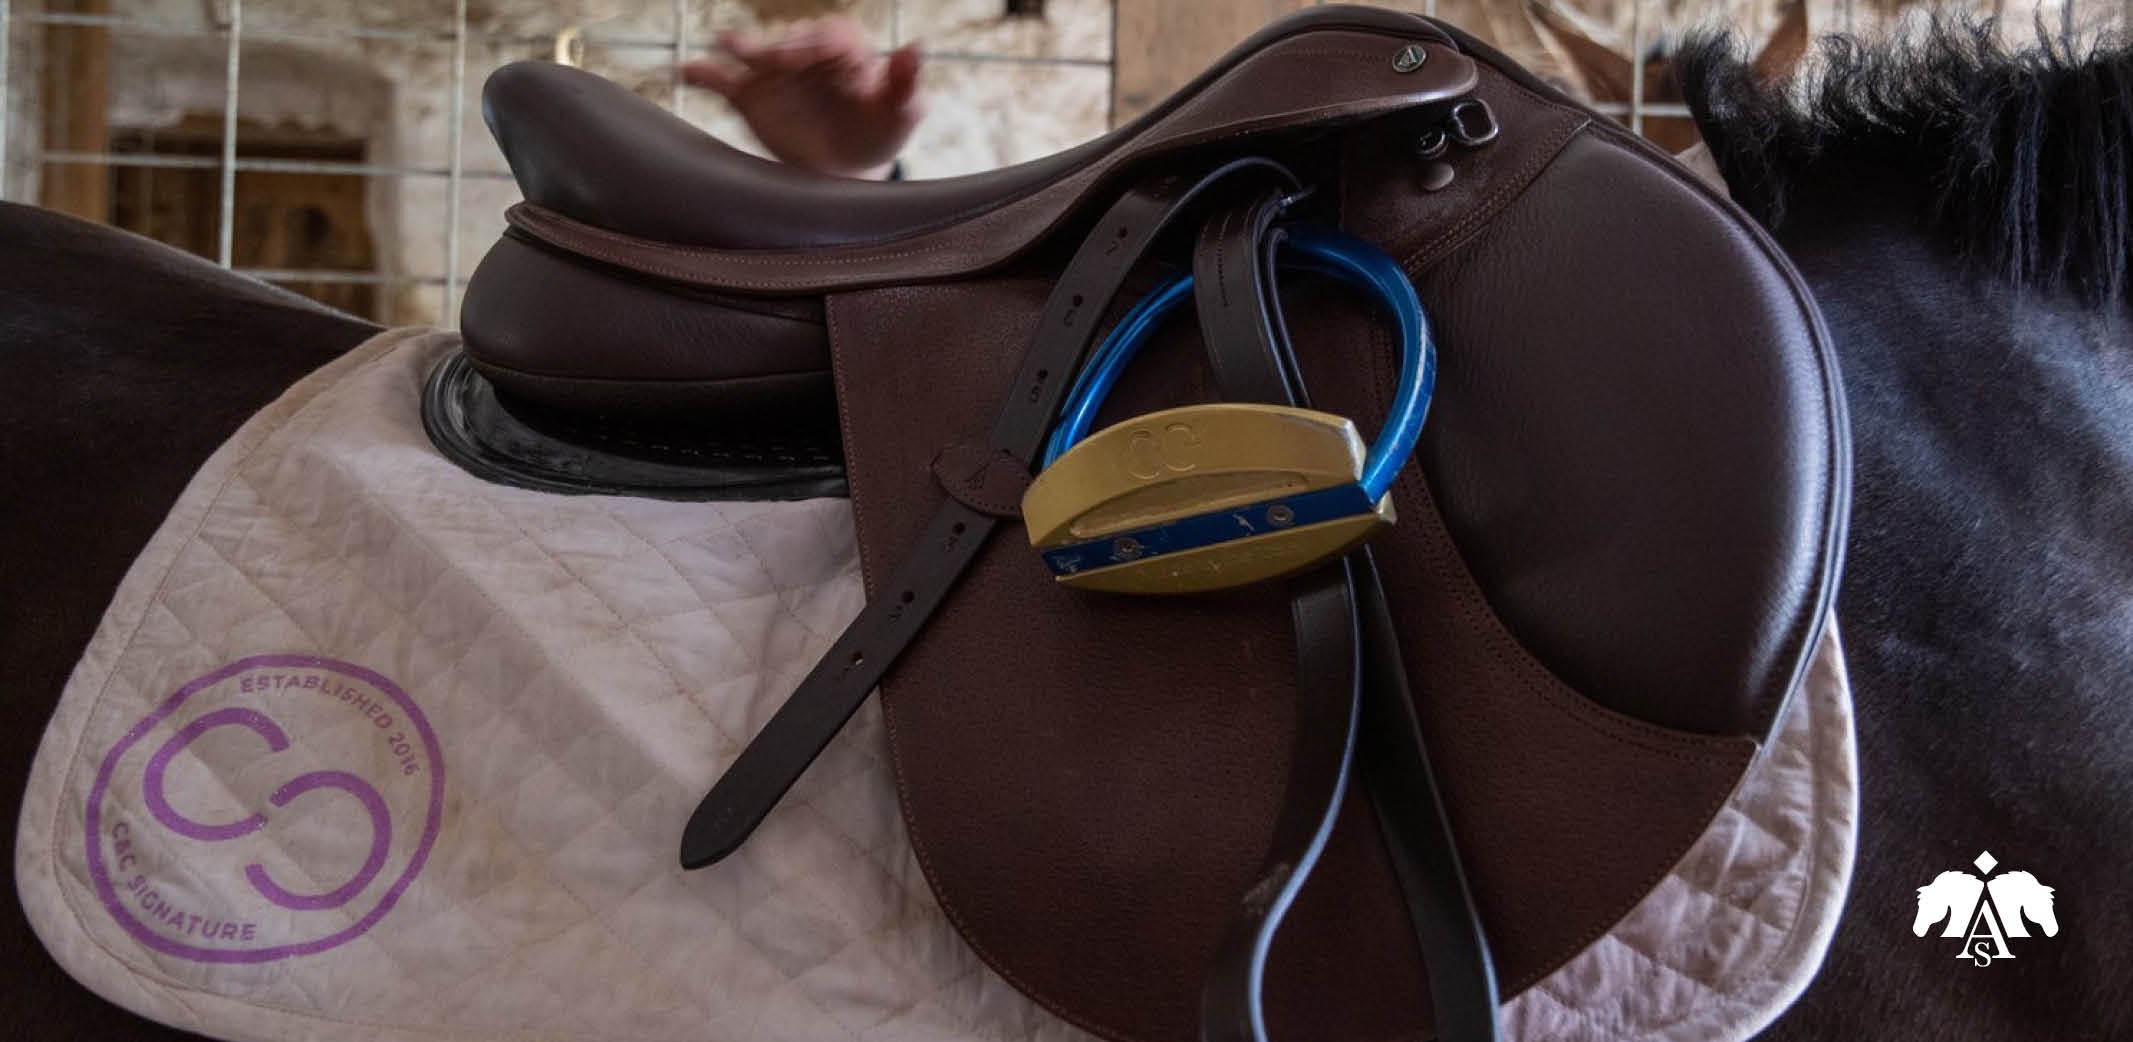 Product review: Arena Saddles and being on a student budget